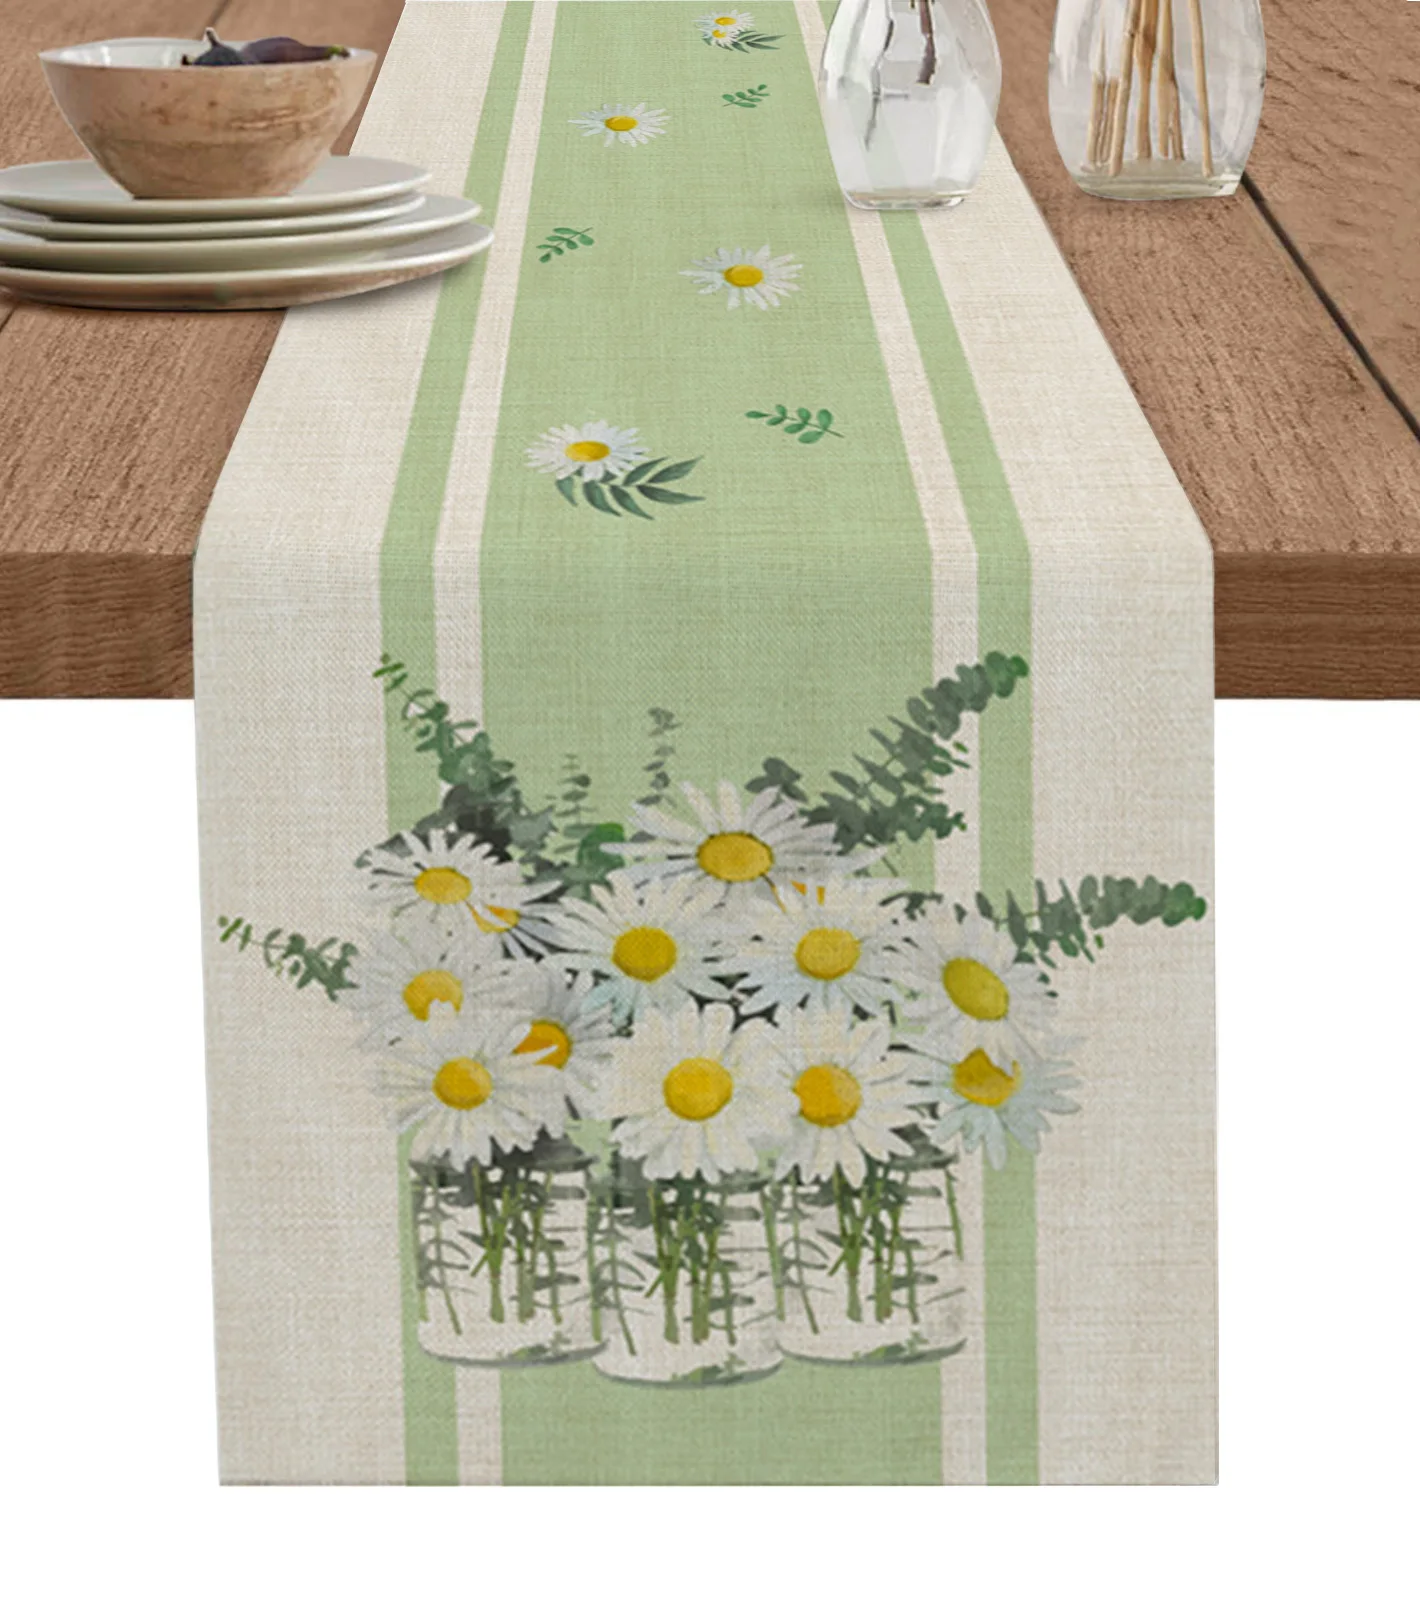 

Daisy Flower Vase Table Runner luxury Kitchen Dinner Table Cover Wedding Party Decor Cotton Linen Tablecloth